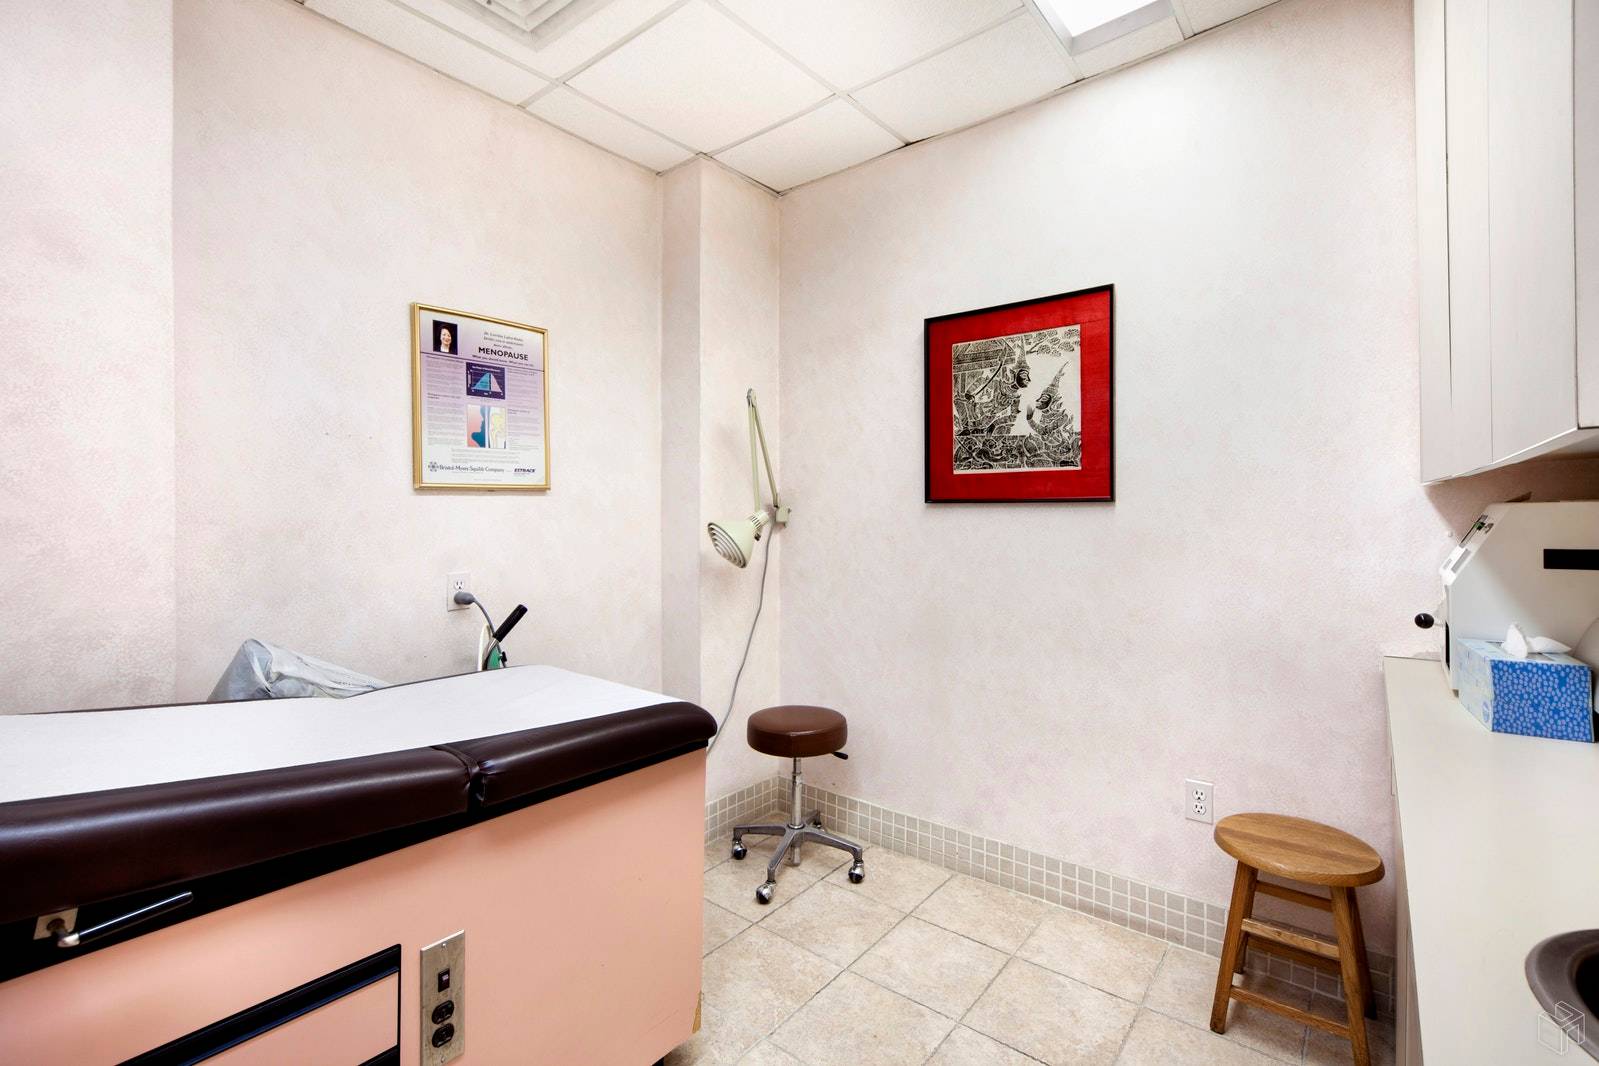 161 Madison is one of the most sought after locations for medical offices in the city.